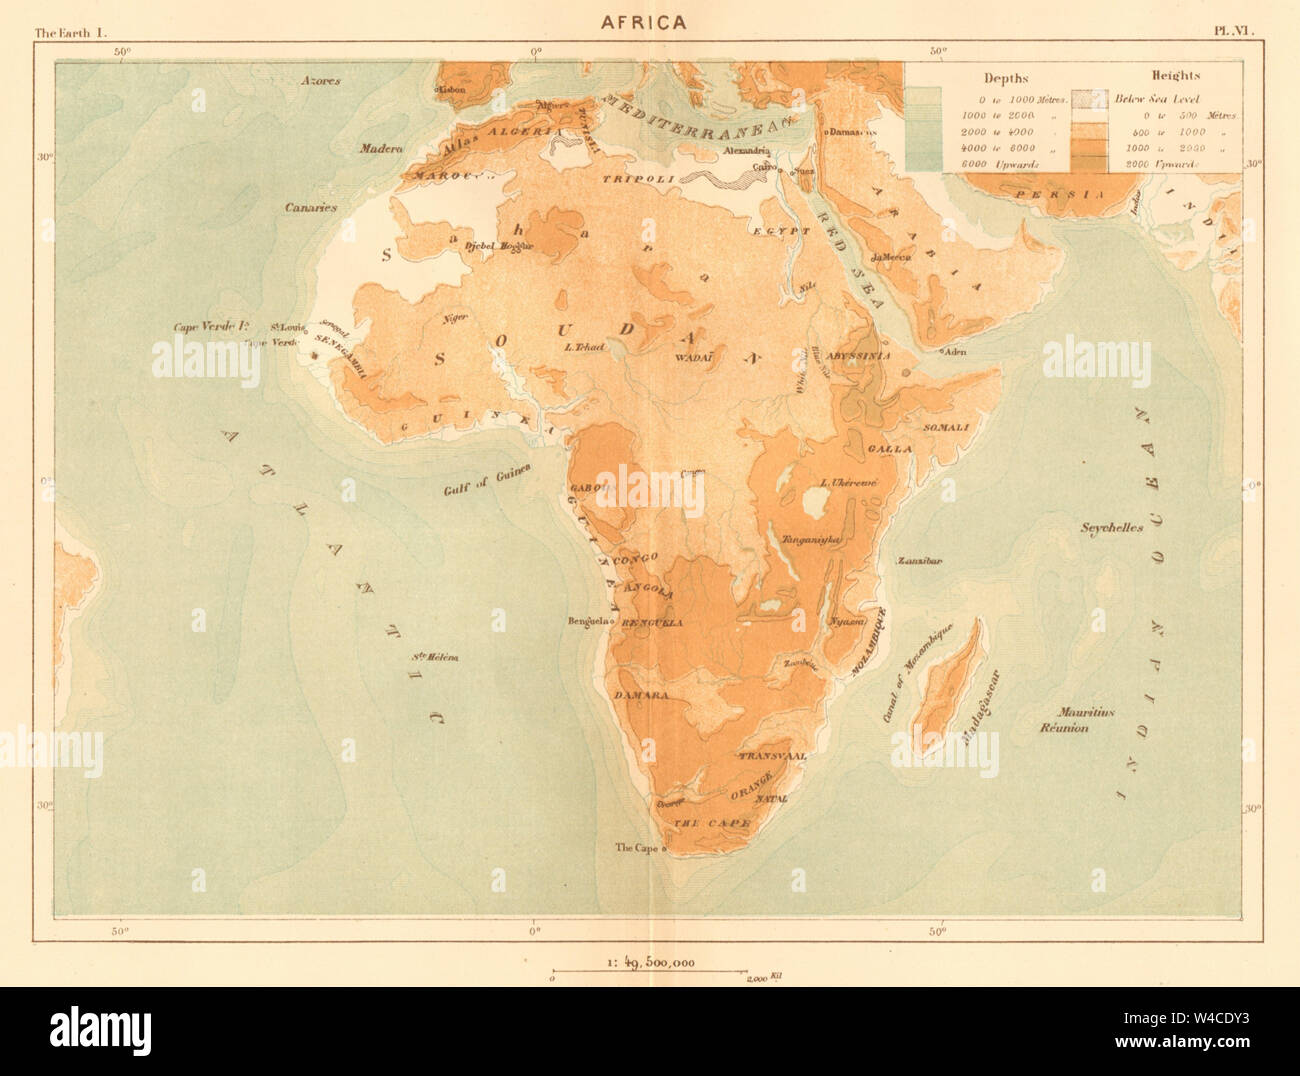 Africa 1886 old antique vintage map plan chart Stock Photo